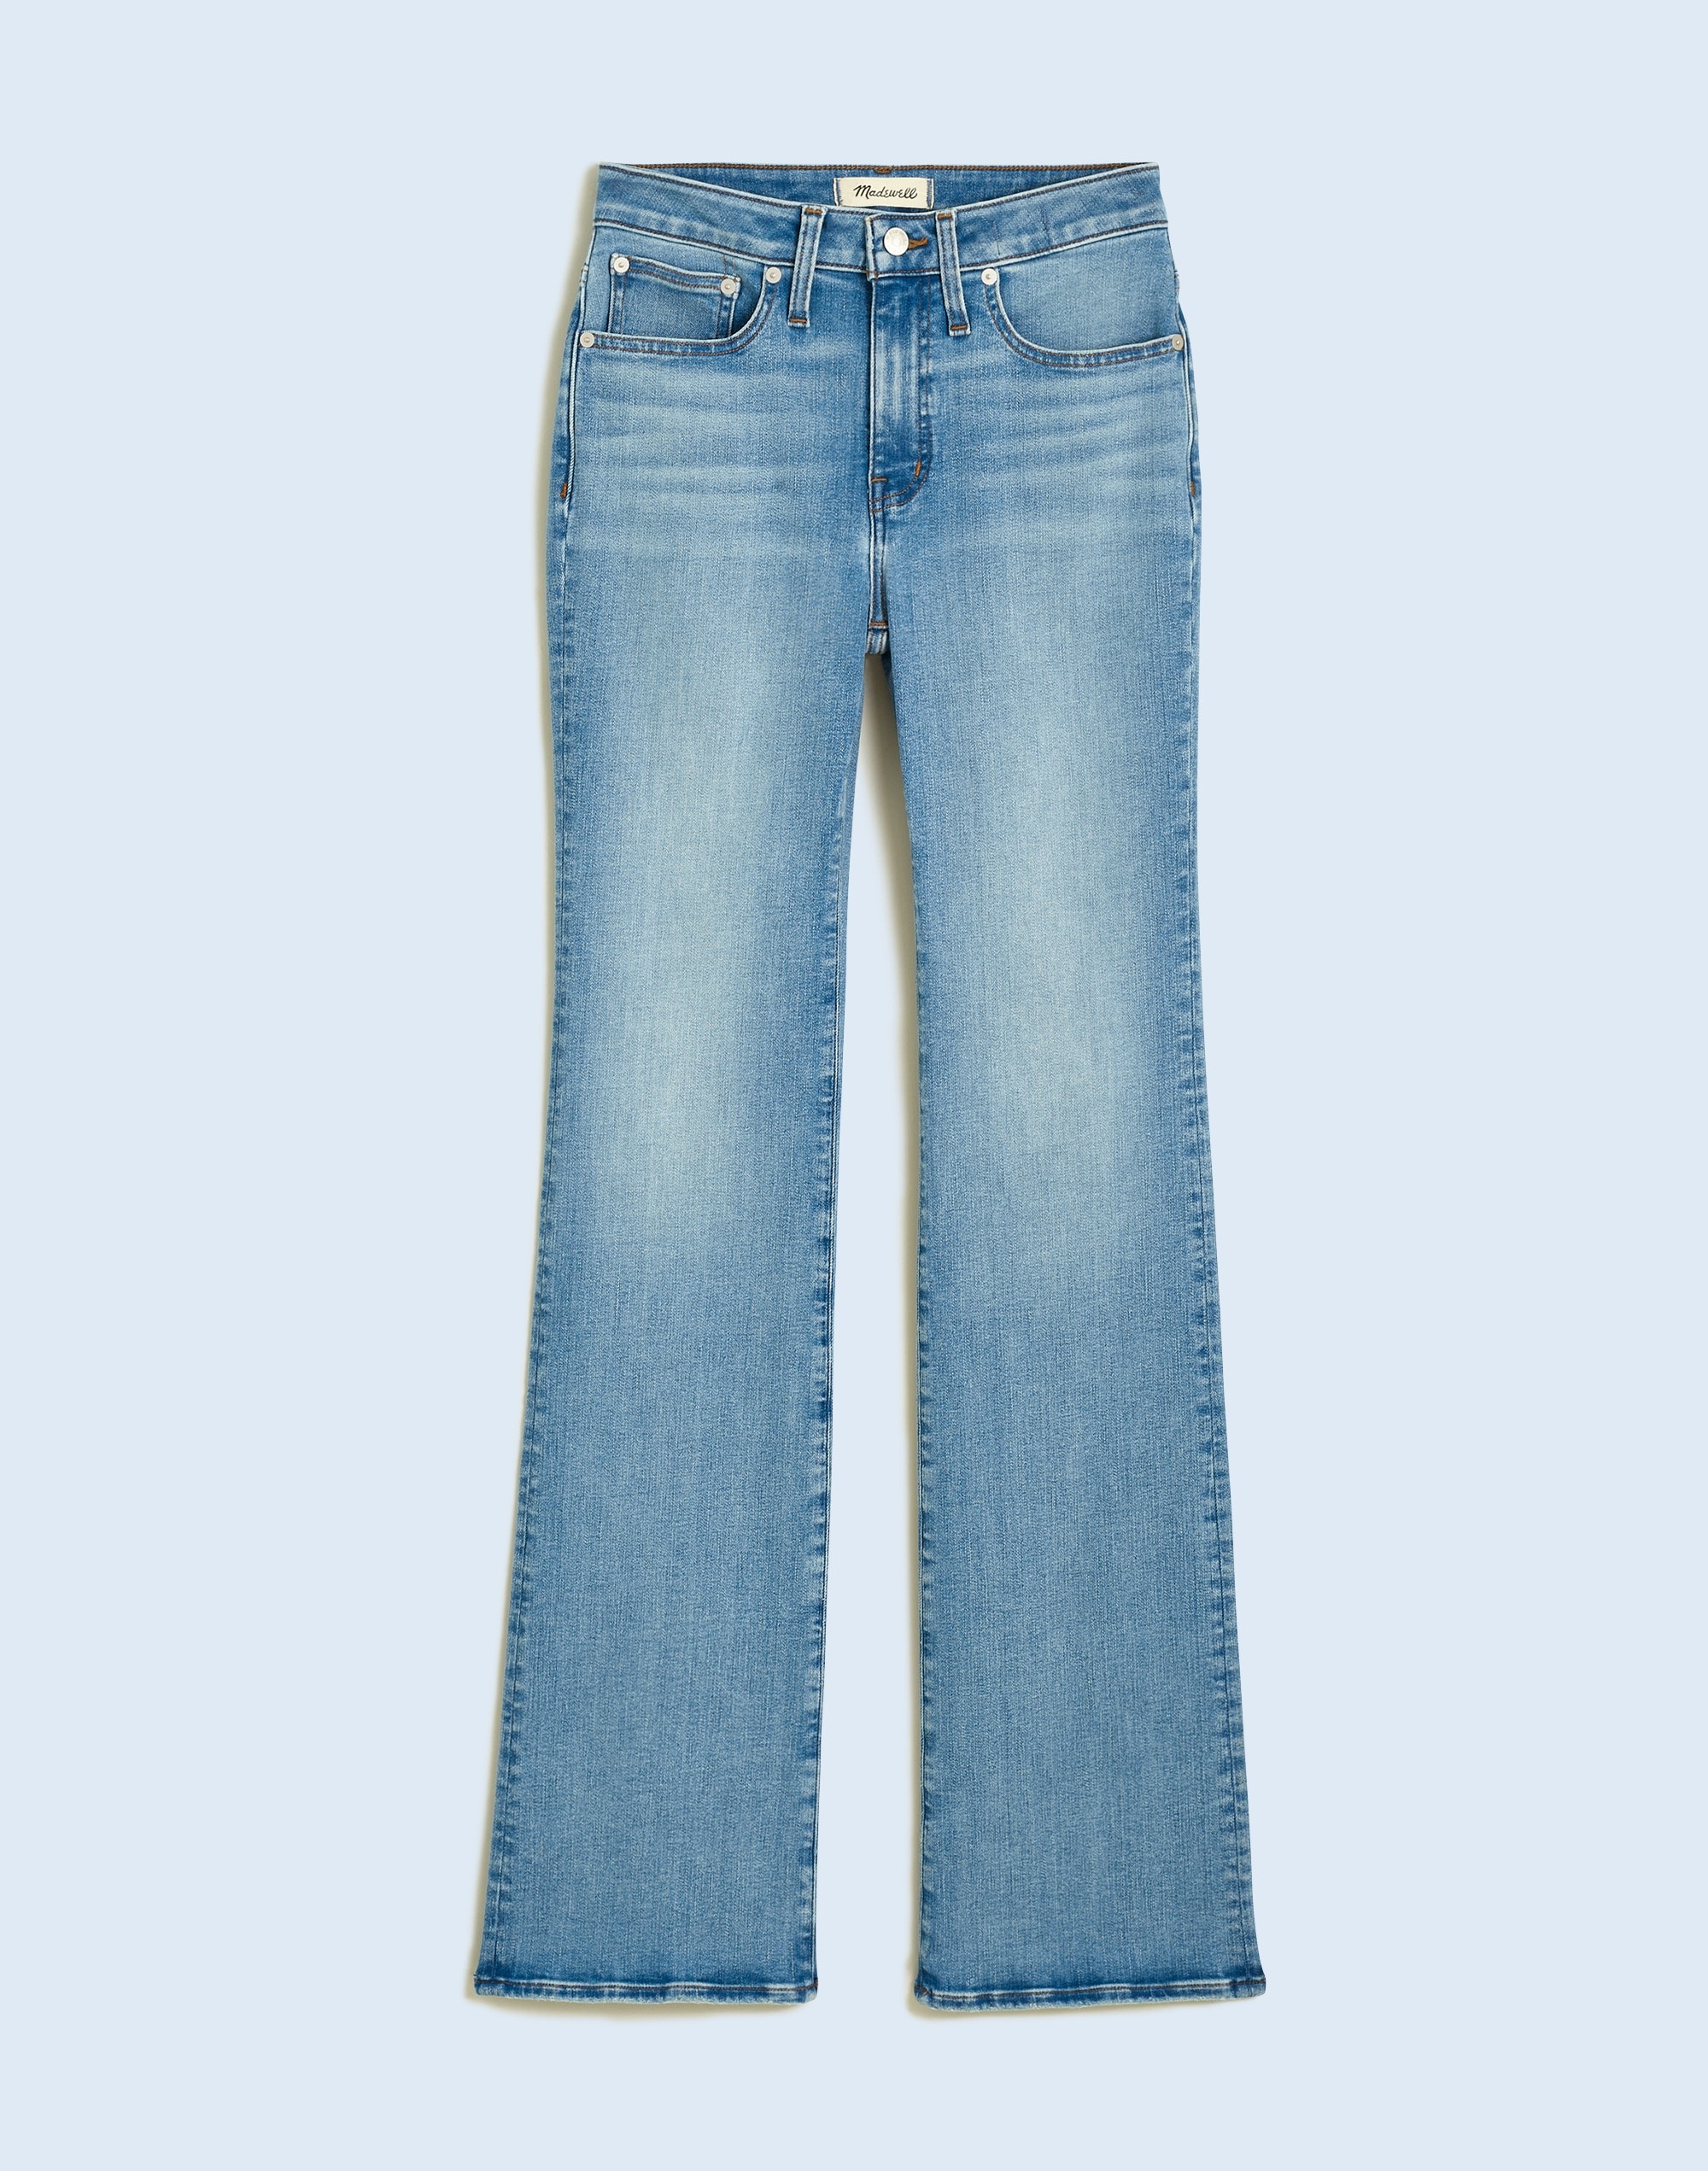 Curvy Kick Out Full-Length Jeans in Merrigan Wash